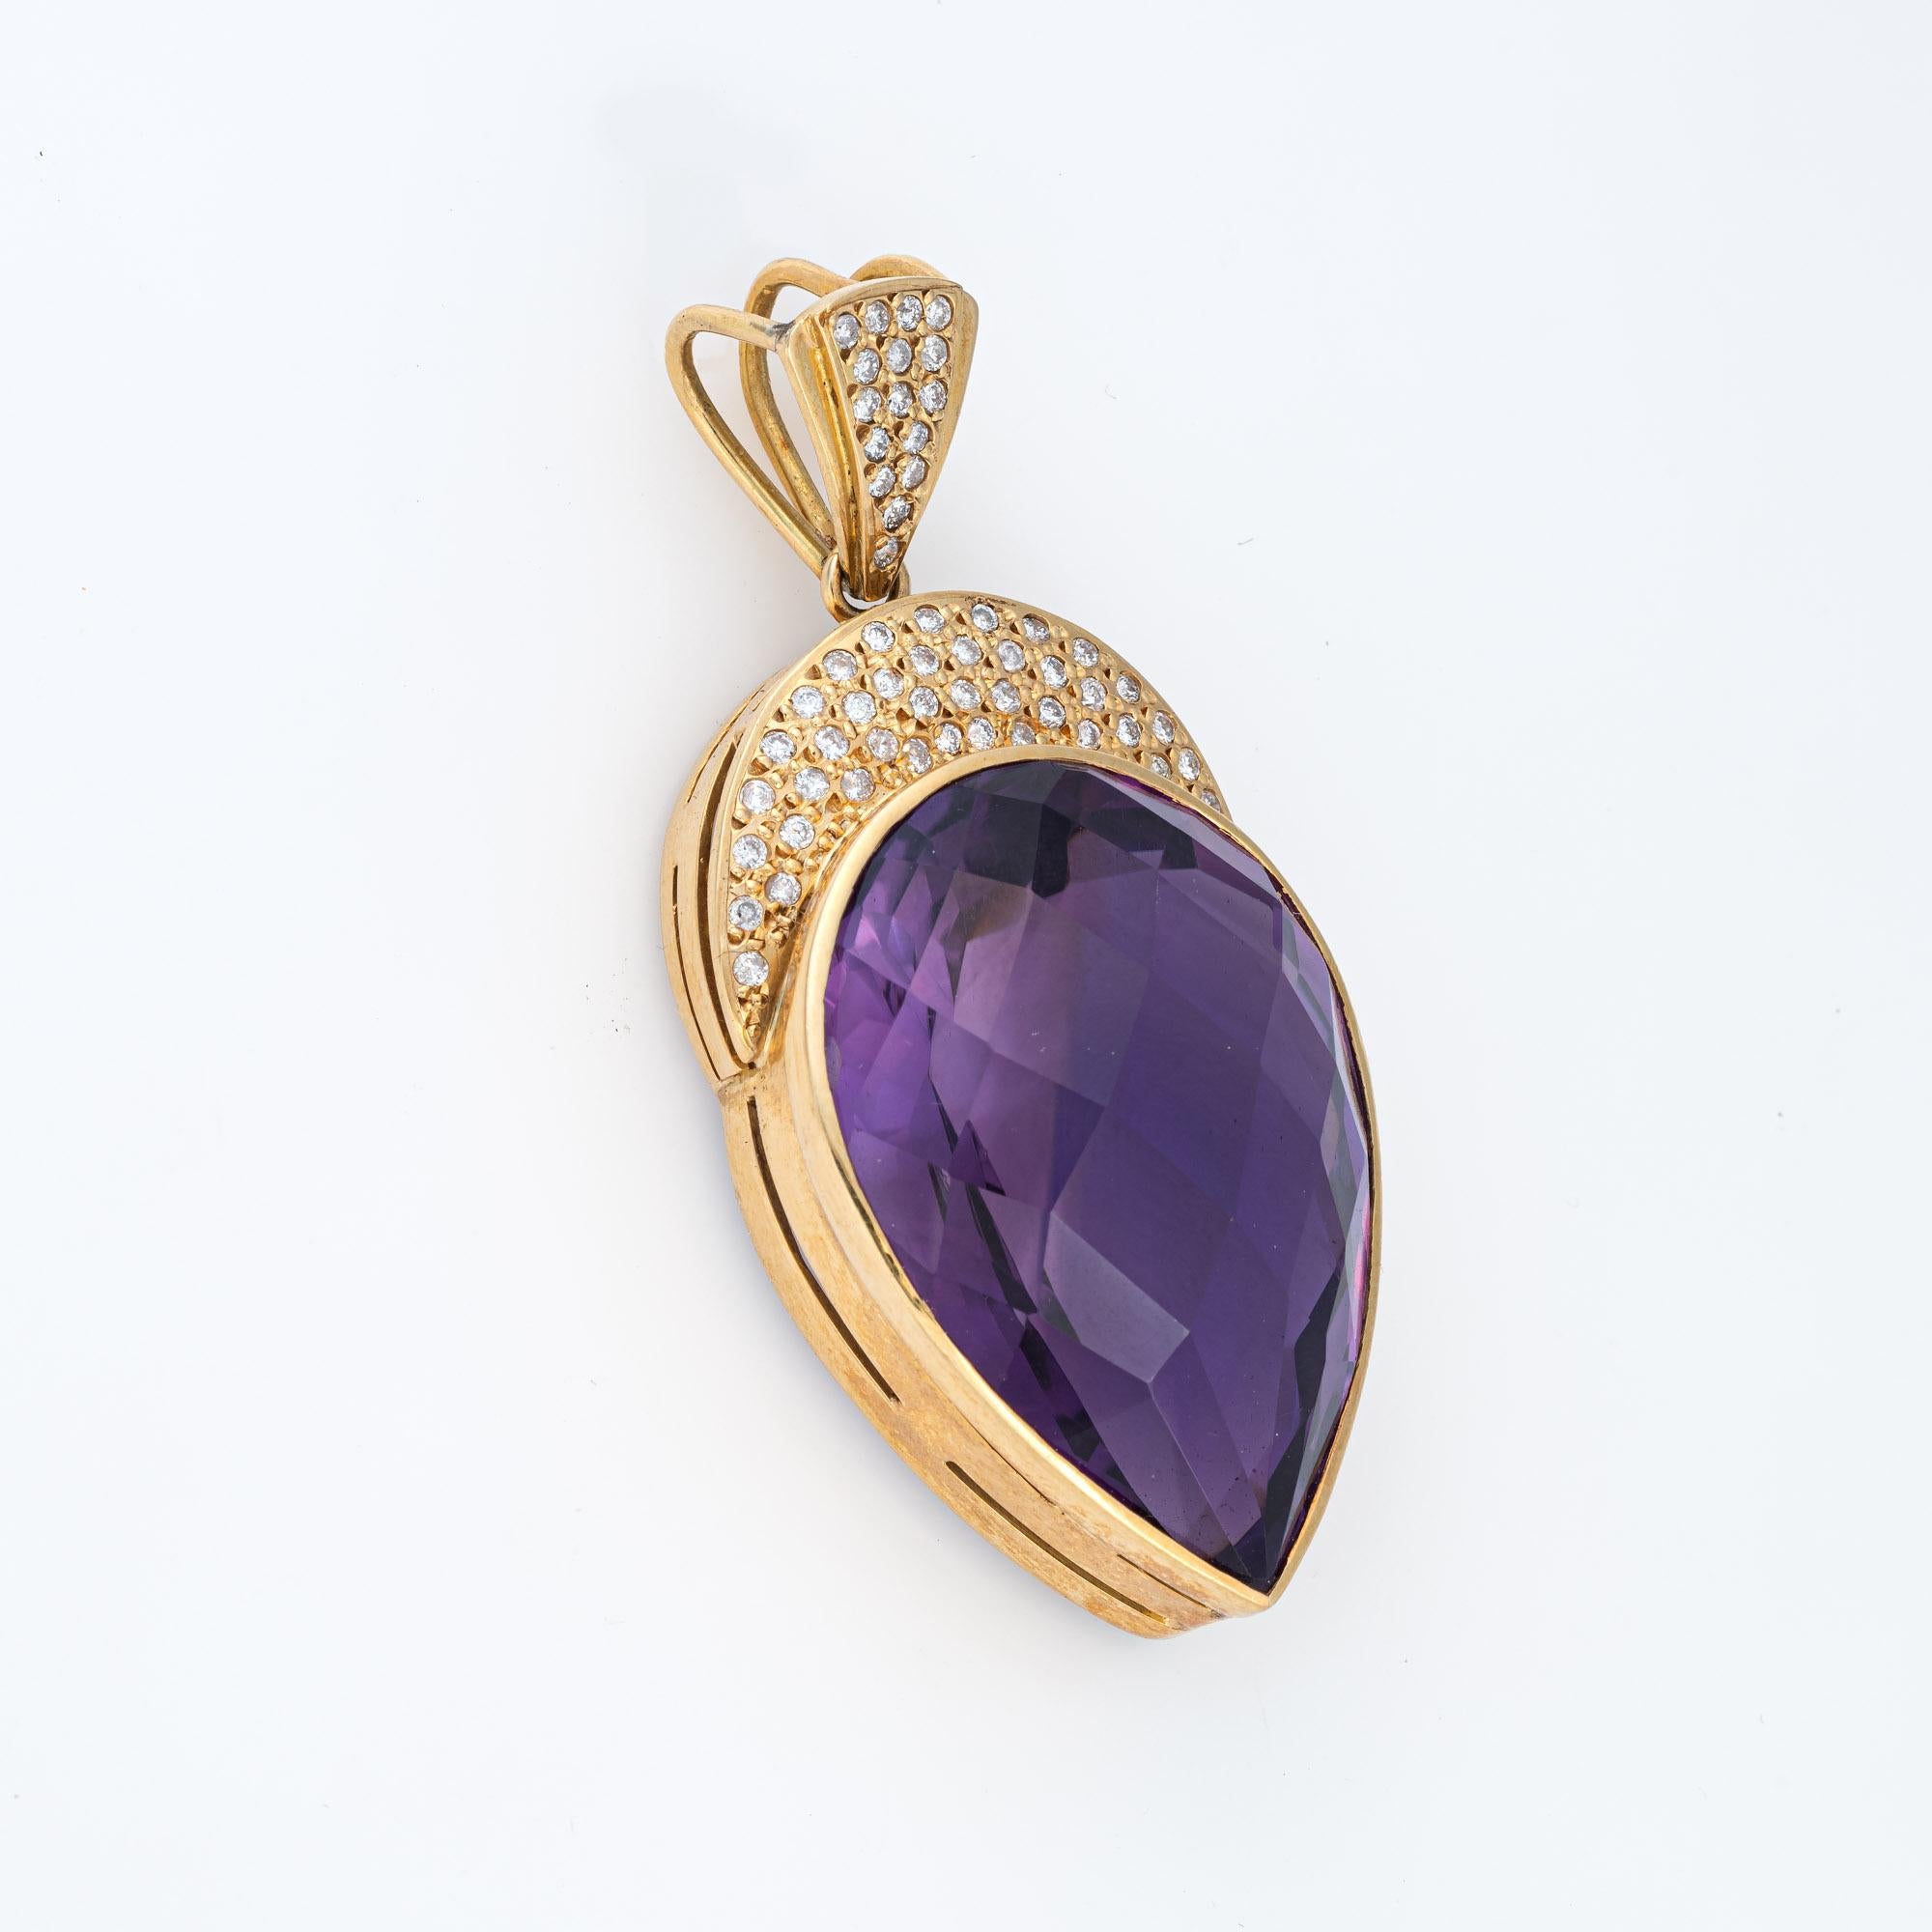 Finely detailed vintage amethyst & diamond pendant crafted in 14 karat yellow gold (circa 1970s). 

Pear cut amethyst measures 36mm x 26mm (estimated at 65 carats), accented with 56 small round brilliant cut diamonds totaling an estimated 0.56